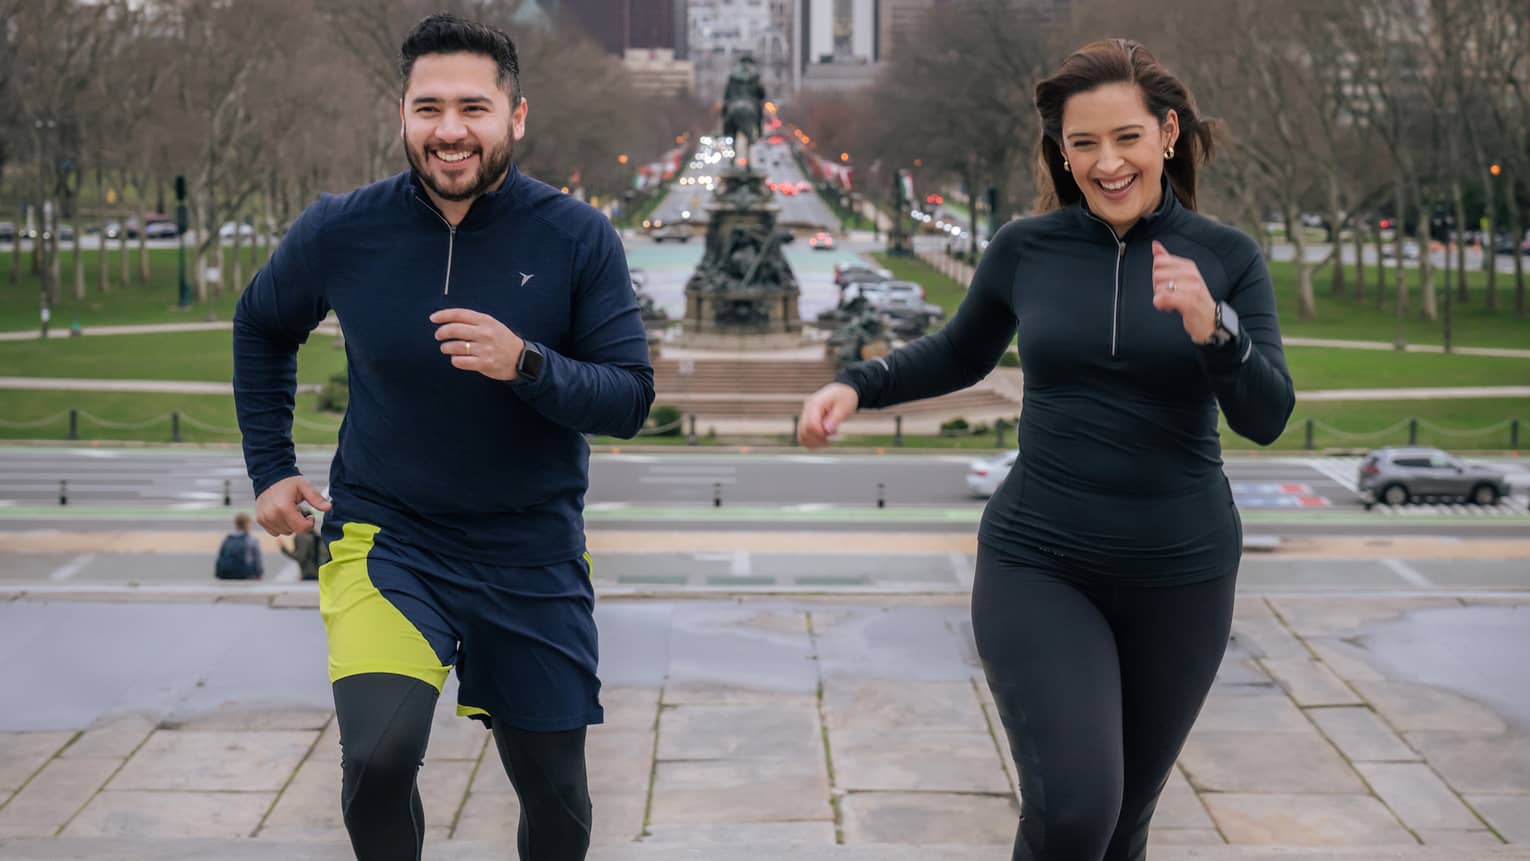 Two guests wearing exercise clothes and running outside.